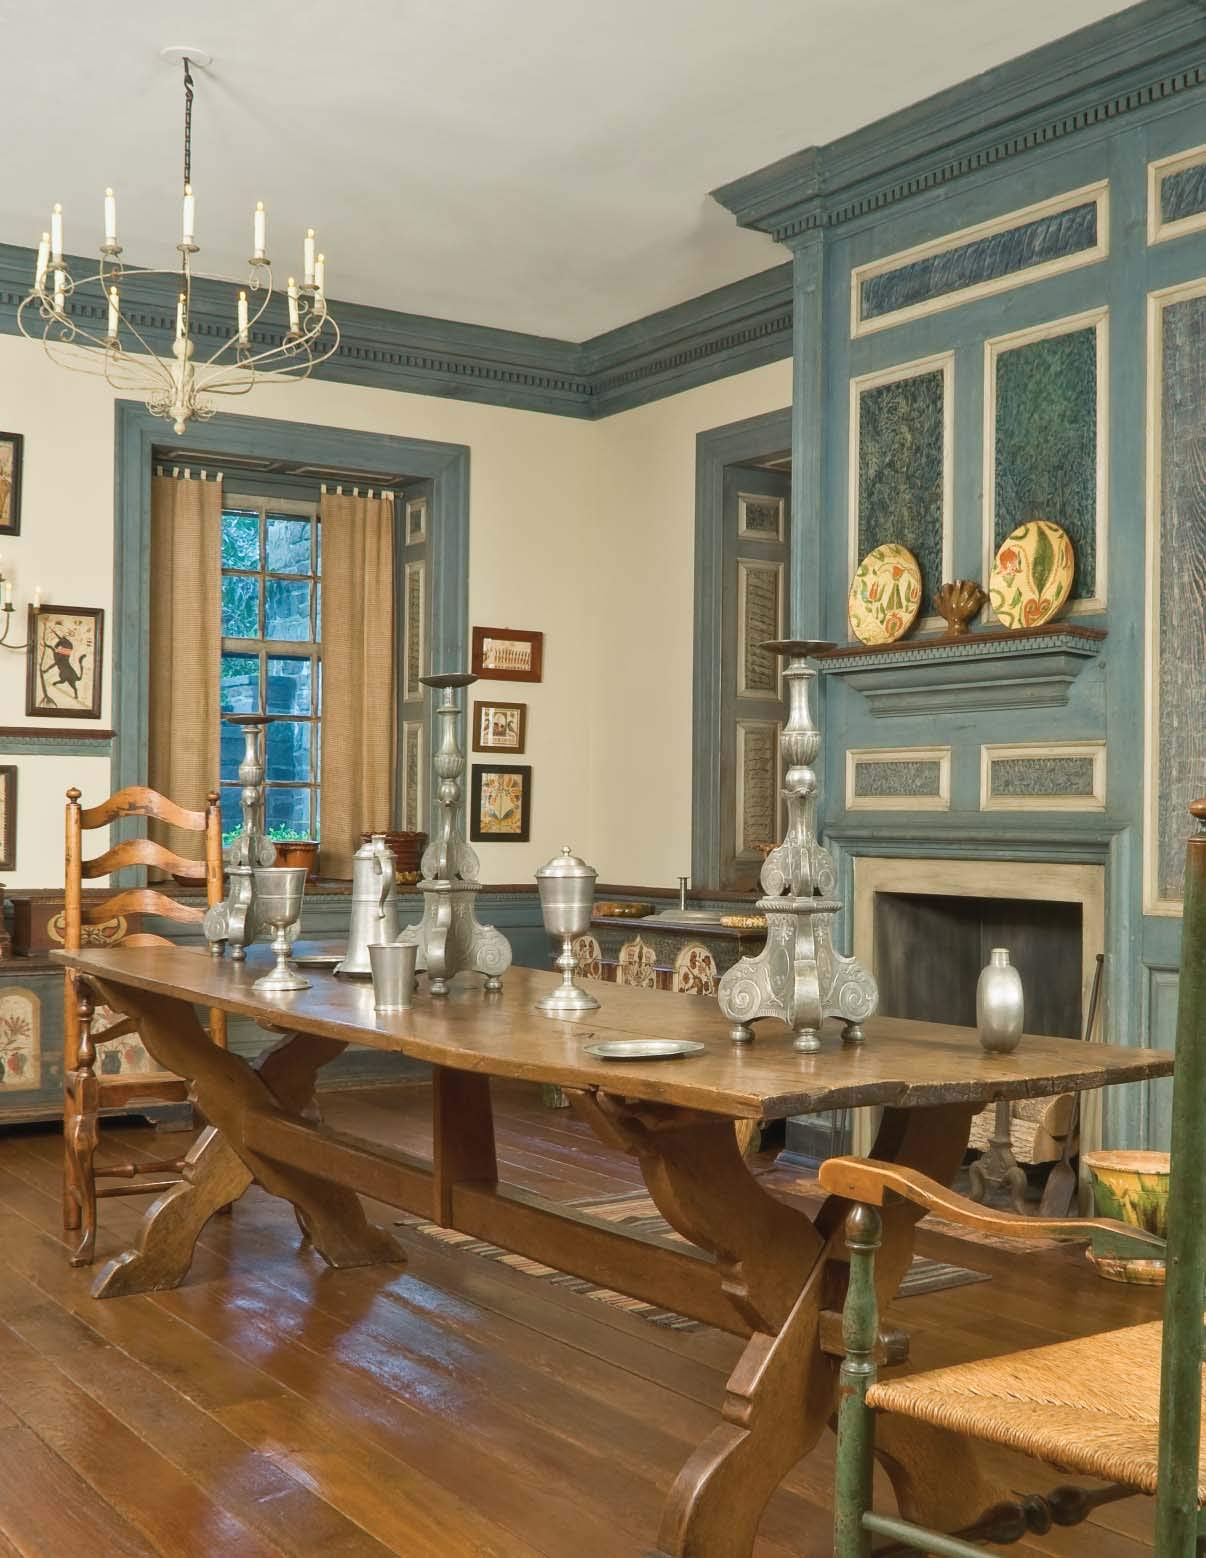 Traditional American Rooms: Celebrating Style, Craftsmanship, and Historic Woodwork (Fox Chapel Publishing) Guided Tour of Rooms at Winterthur Museum and Country Estate (Winterthur Style Sourcebook)